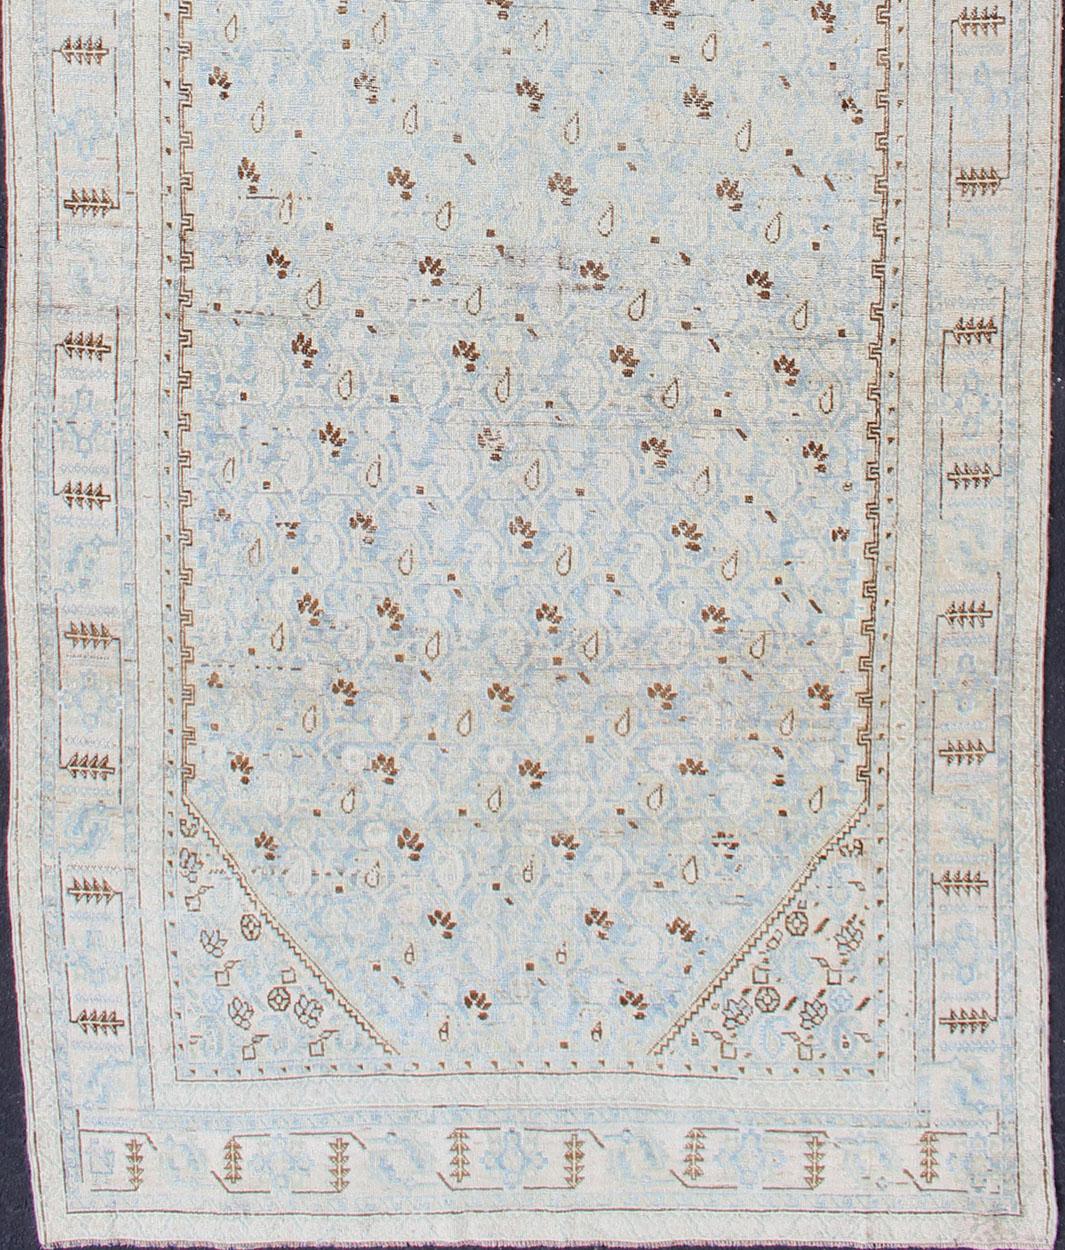 All-over Paisley motif antique Persian Gallery runner Malayer in tones of pale powder blue and ice blue, Gallery rug, antique Malayer Gallery Runner. Rug / SUS-2009-562, country of origin / type: Iran / Malayer, circa 1910.

This exceptionally